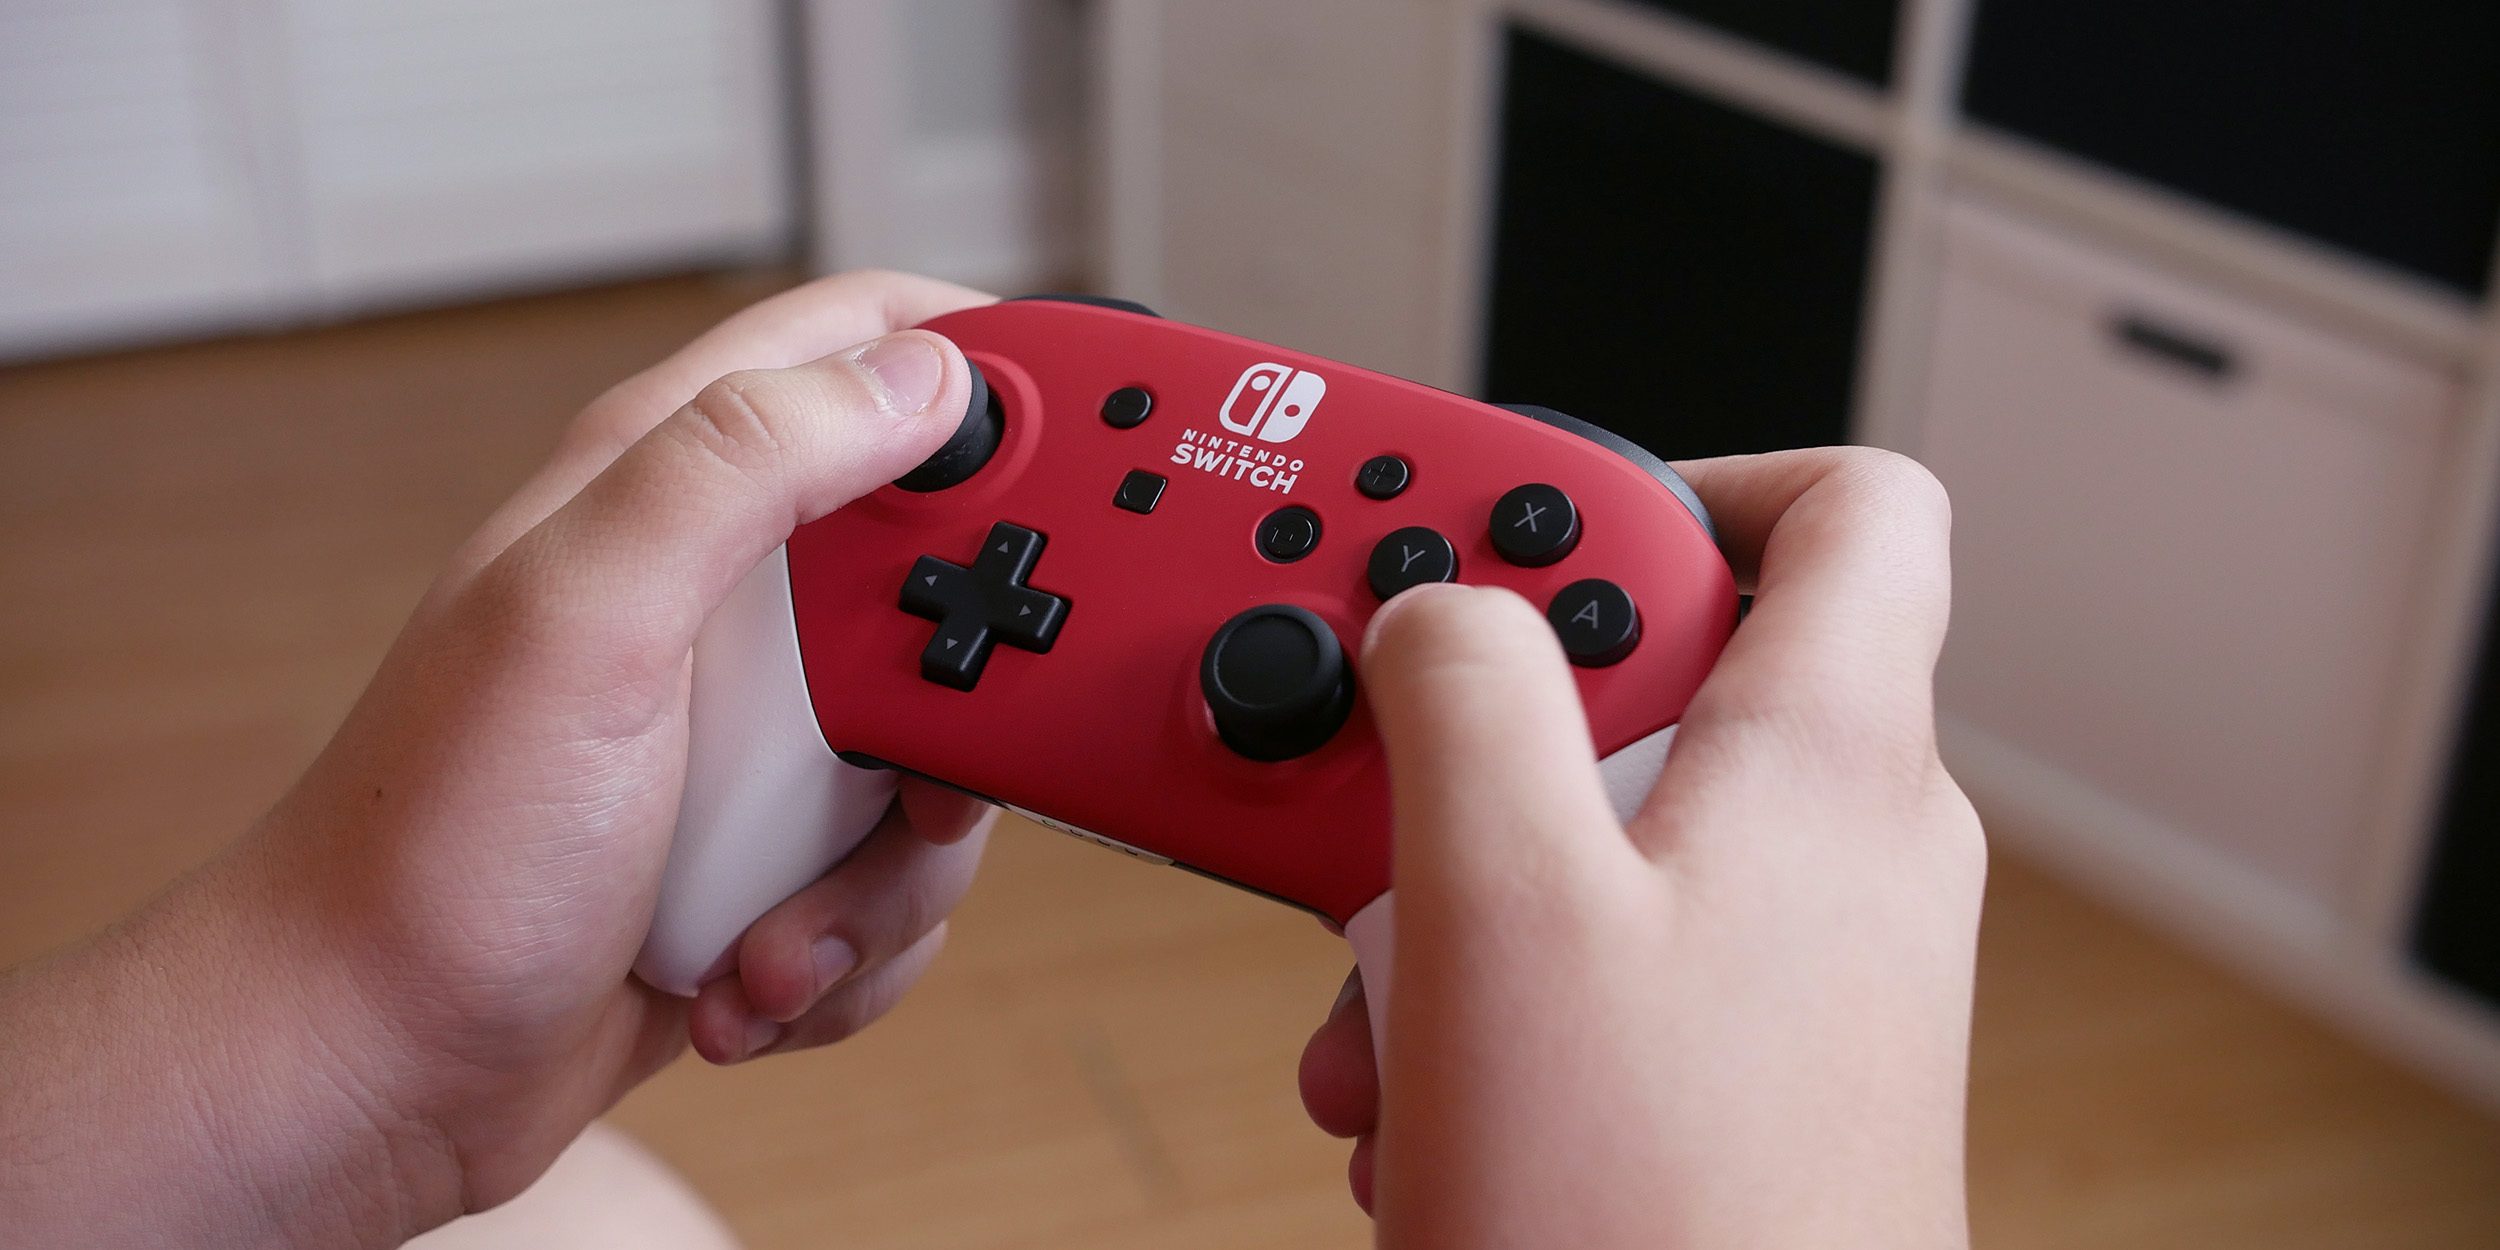 can you use your phone as a nintendo switch controller